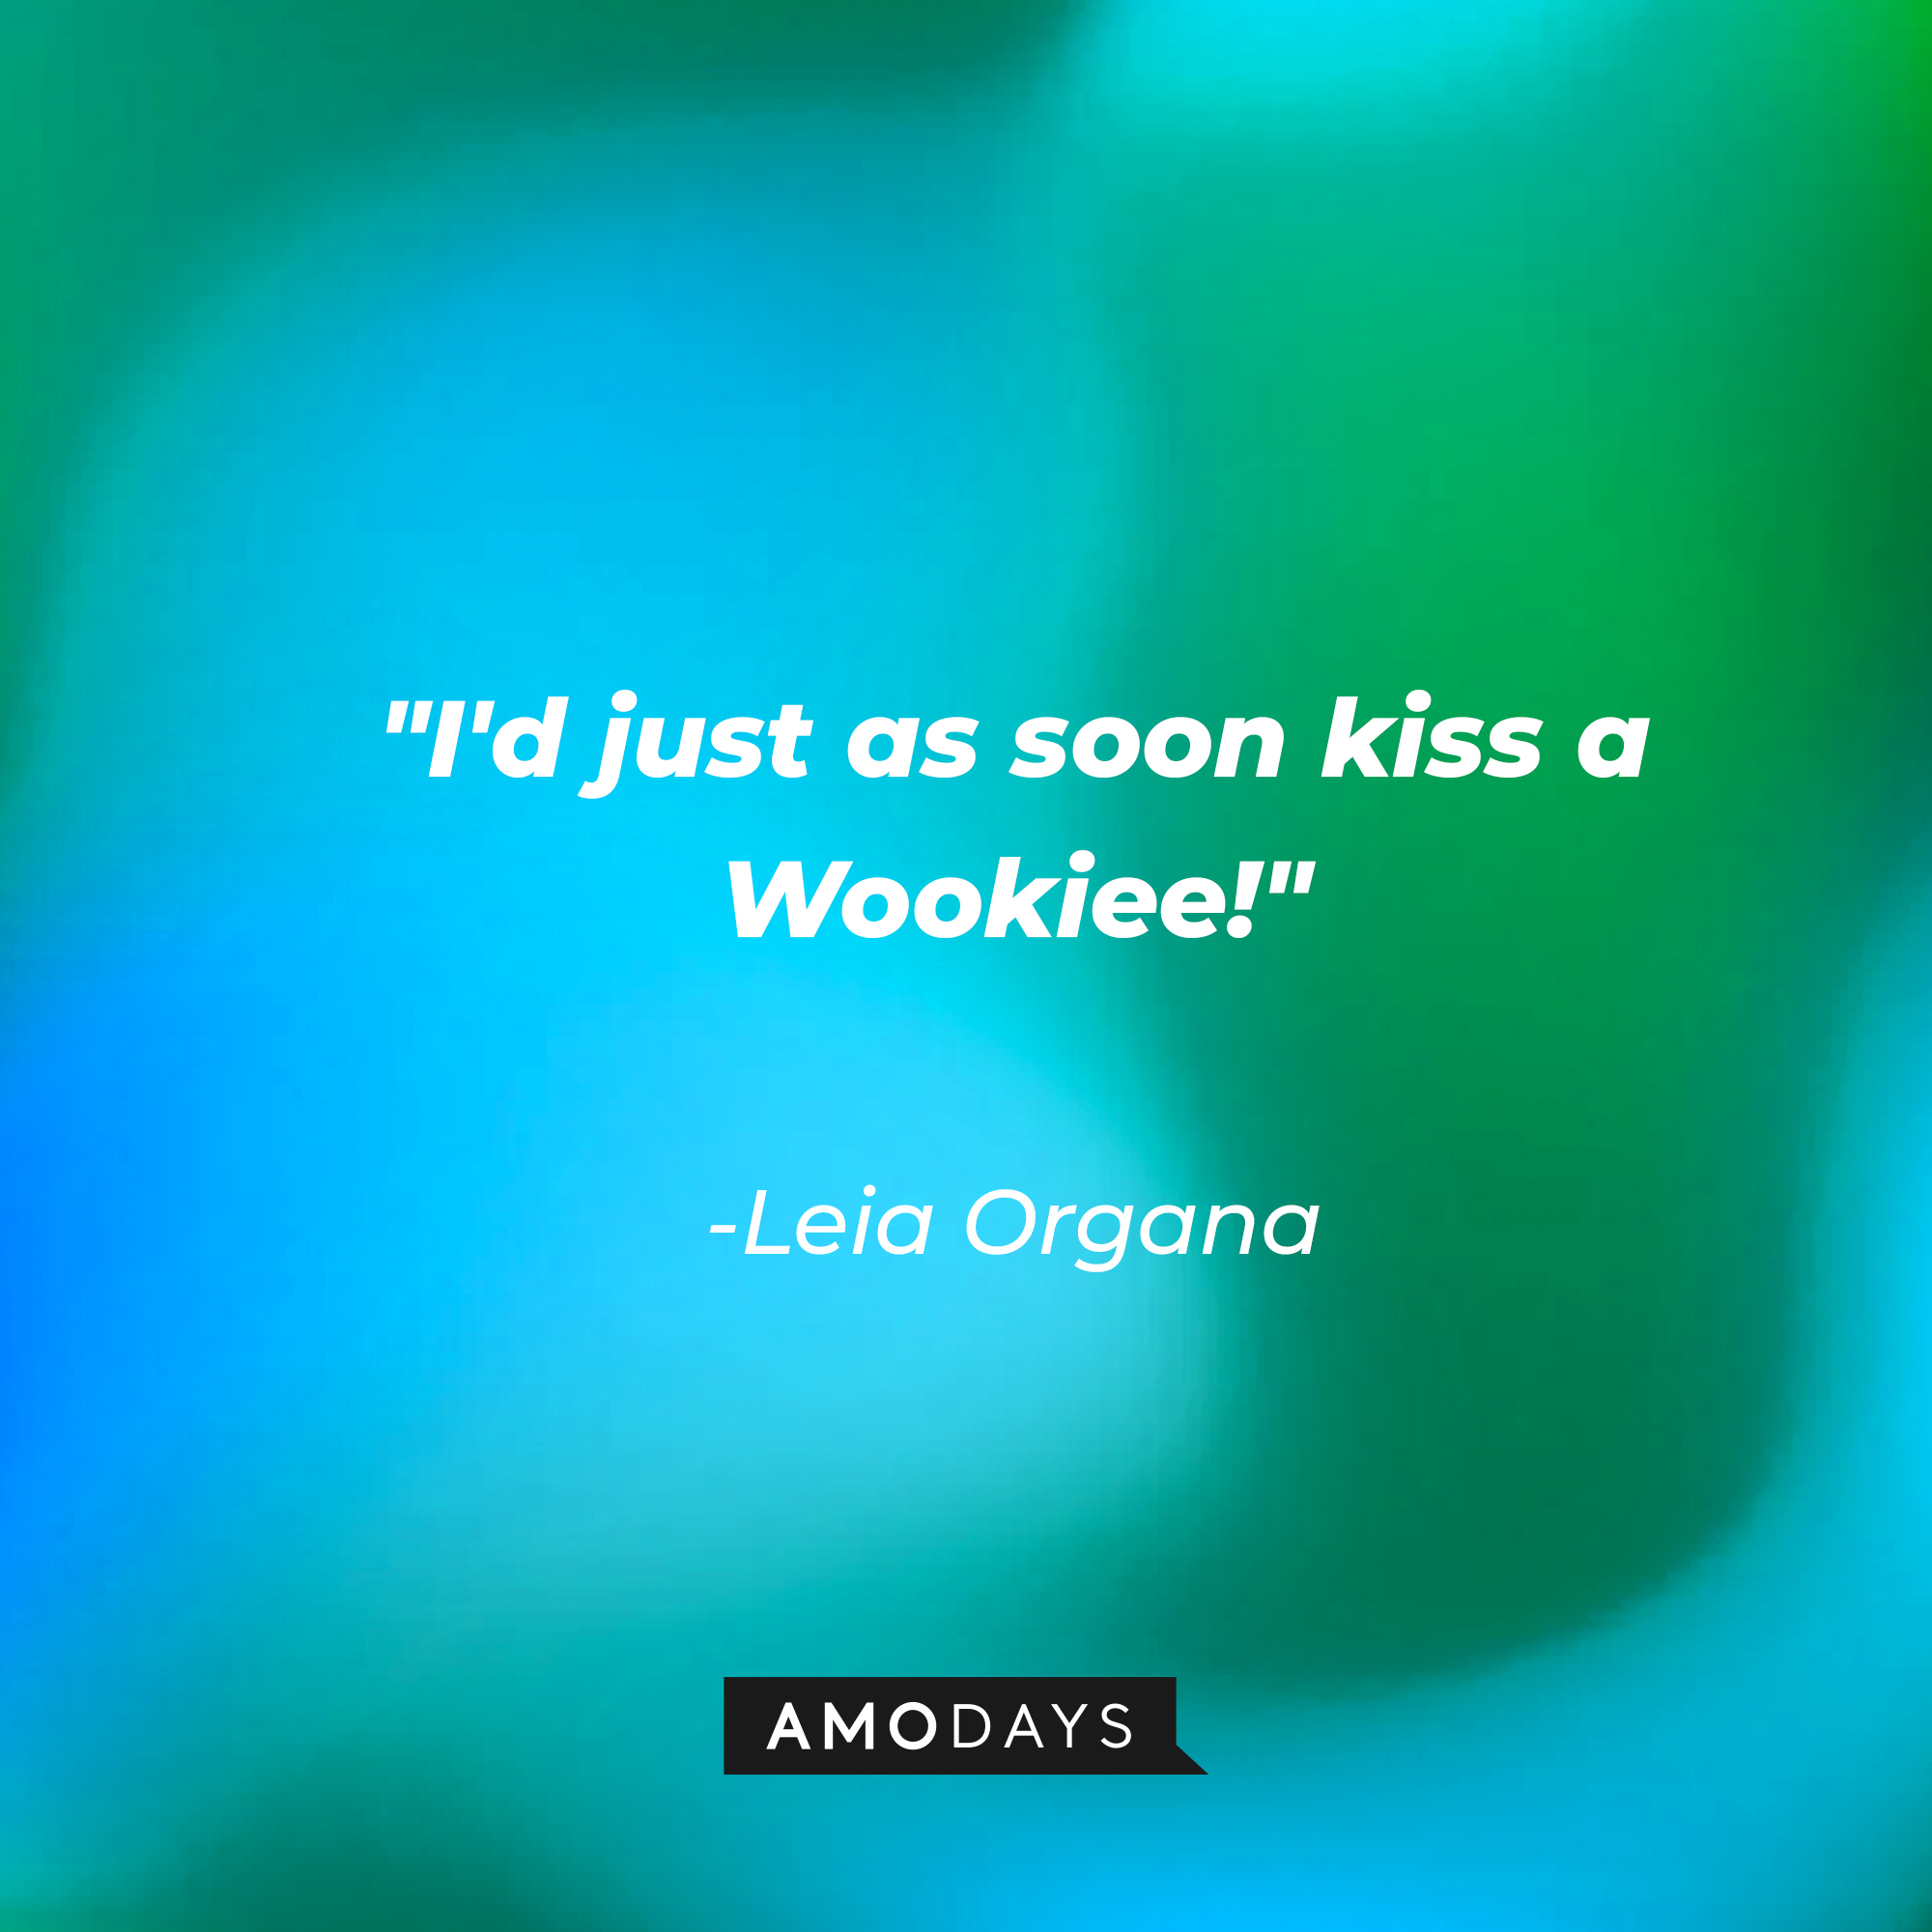 Leia Organa's quote: "I'd just as soon kiss a Wookiee!" | Source: AmoDays